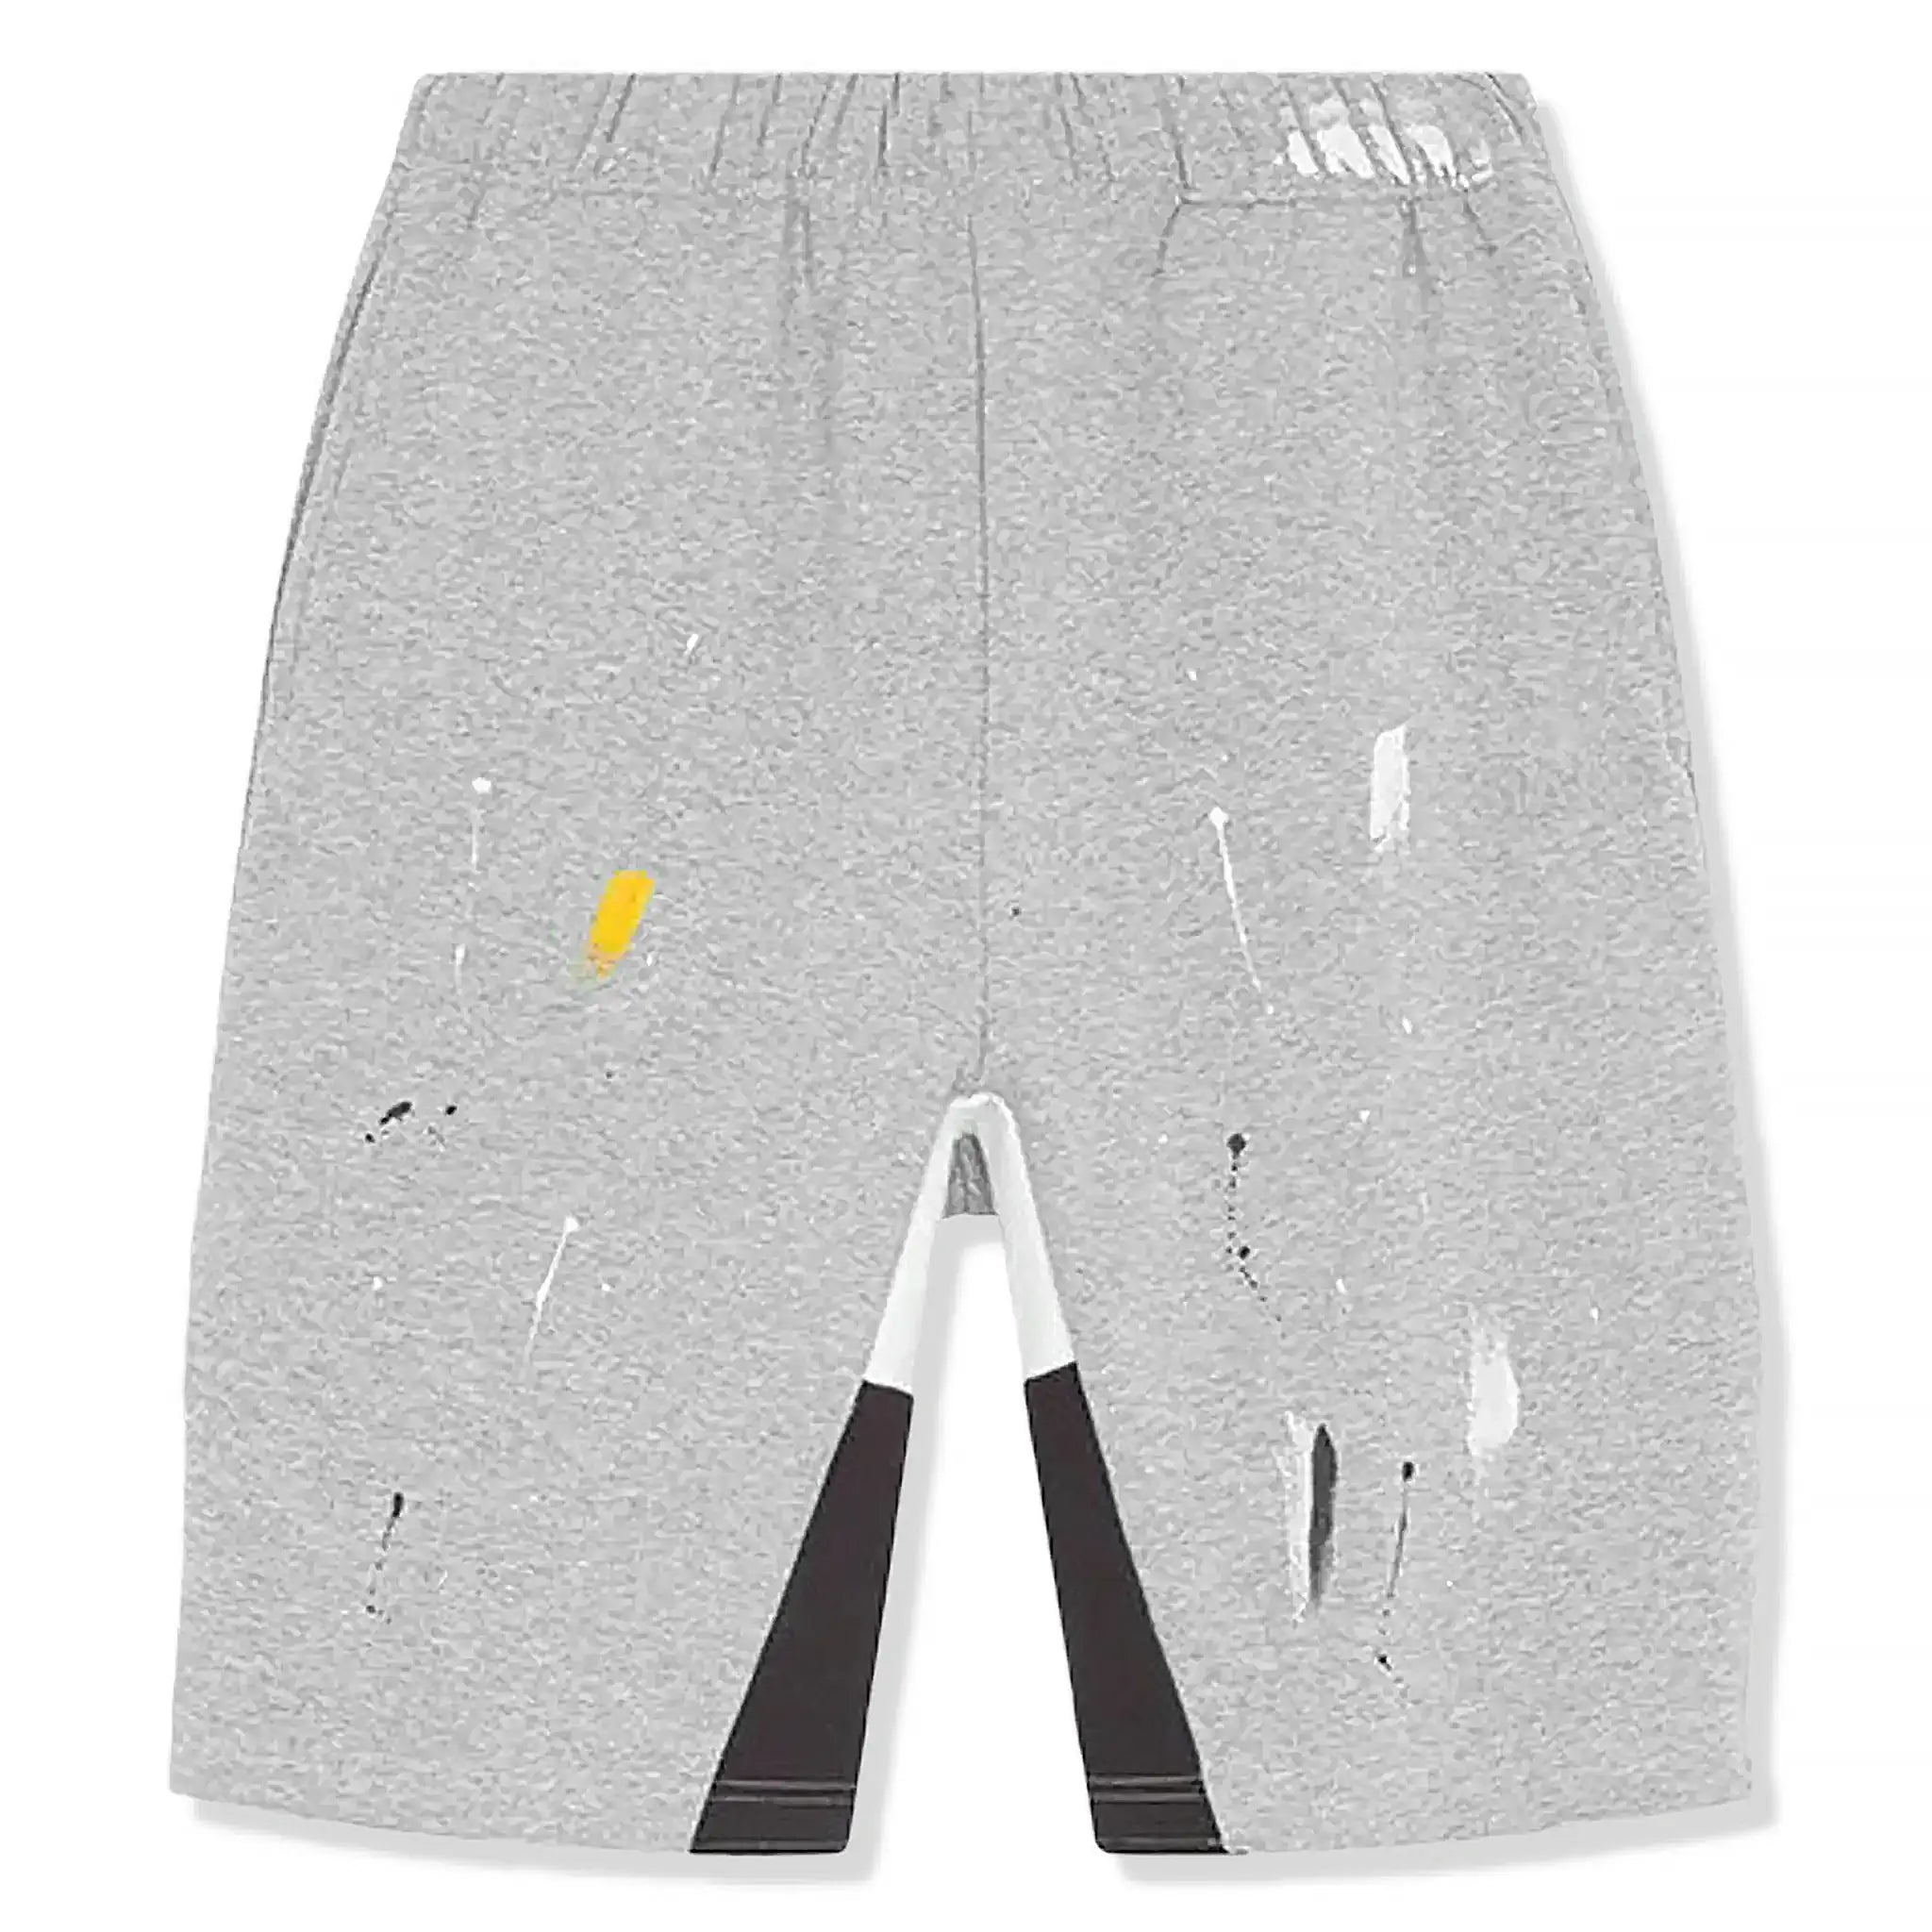 Front view of SIARR Paint Shorts Grey